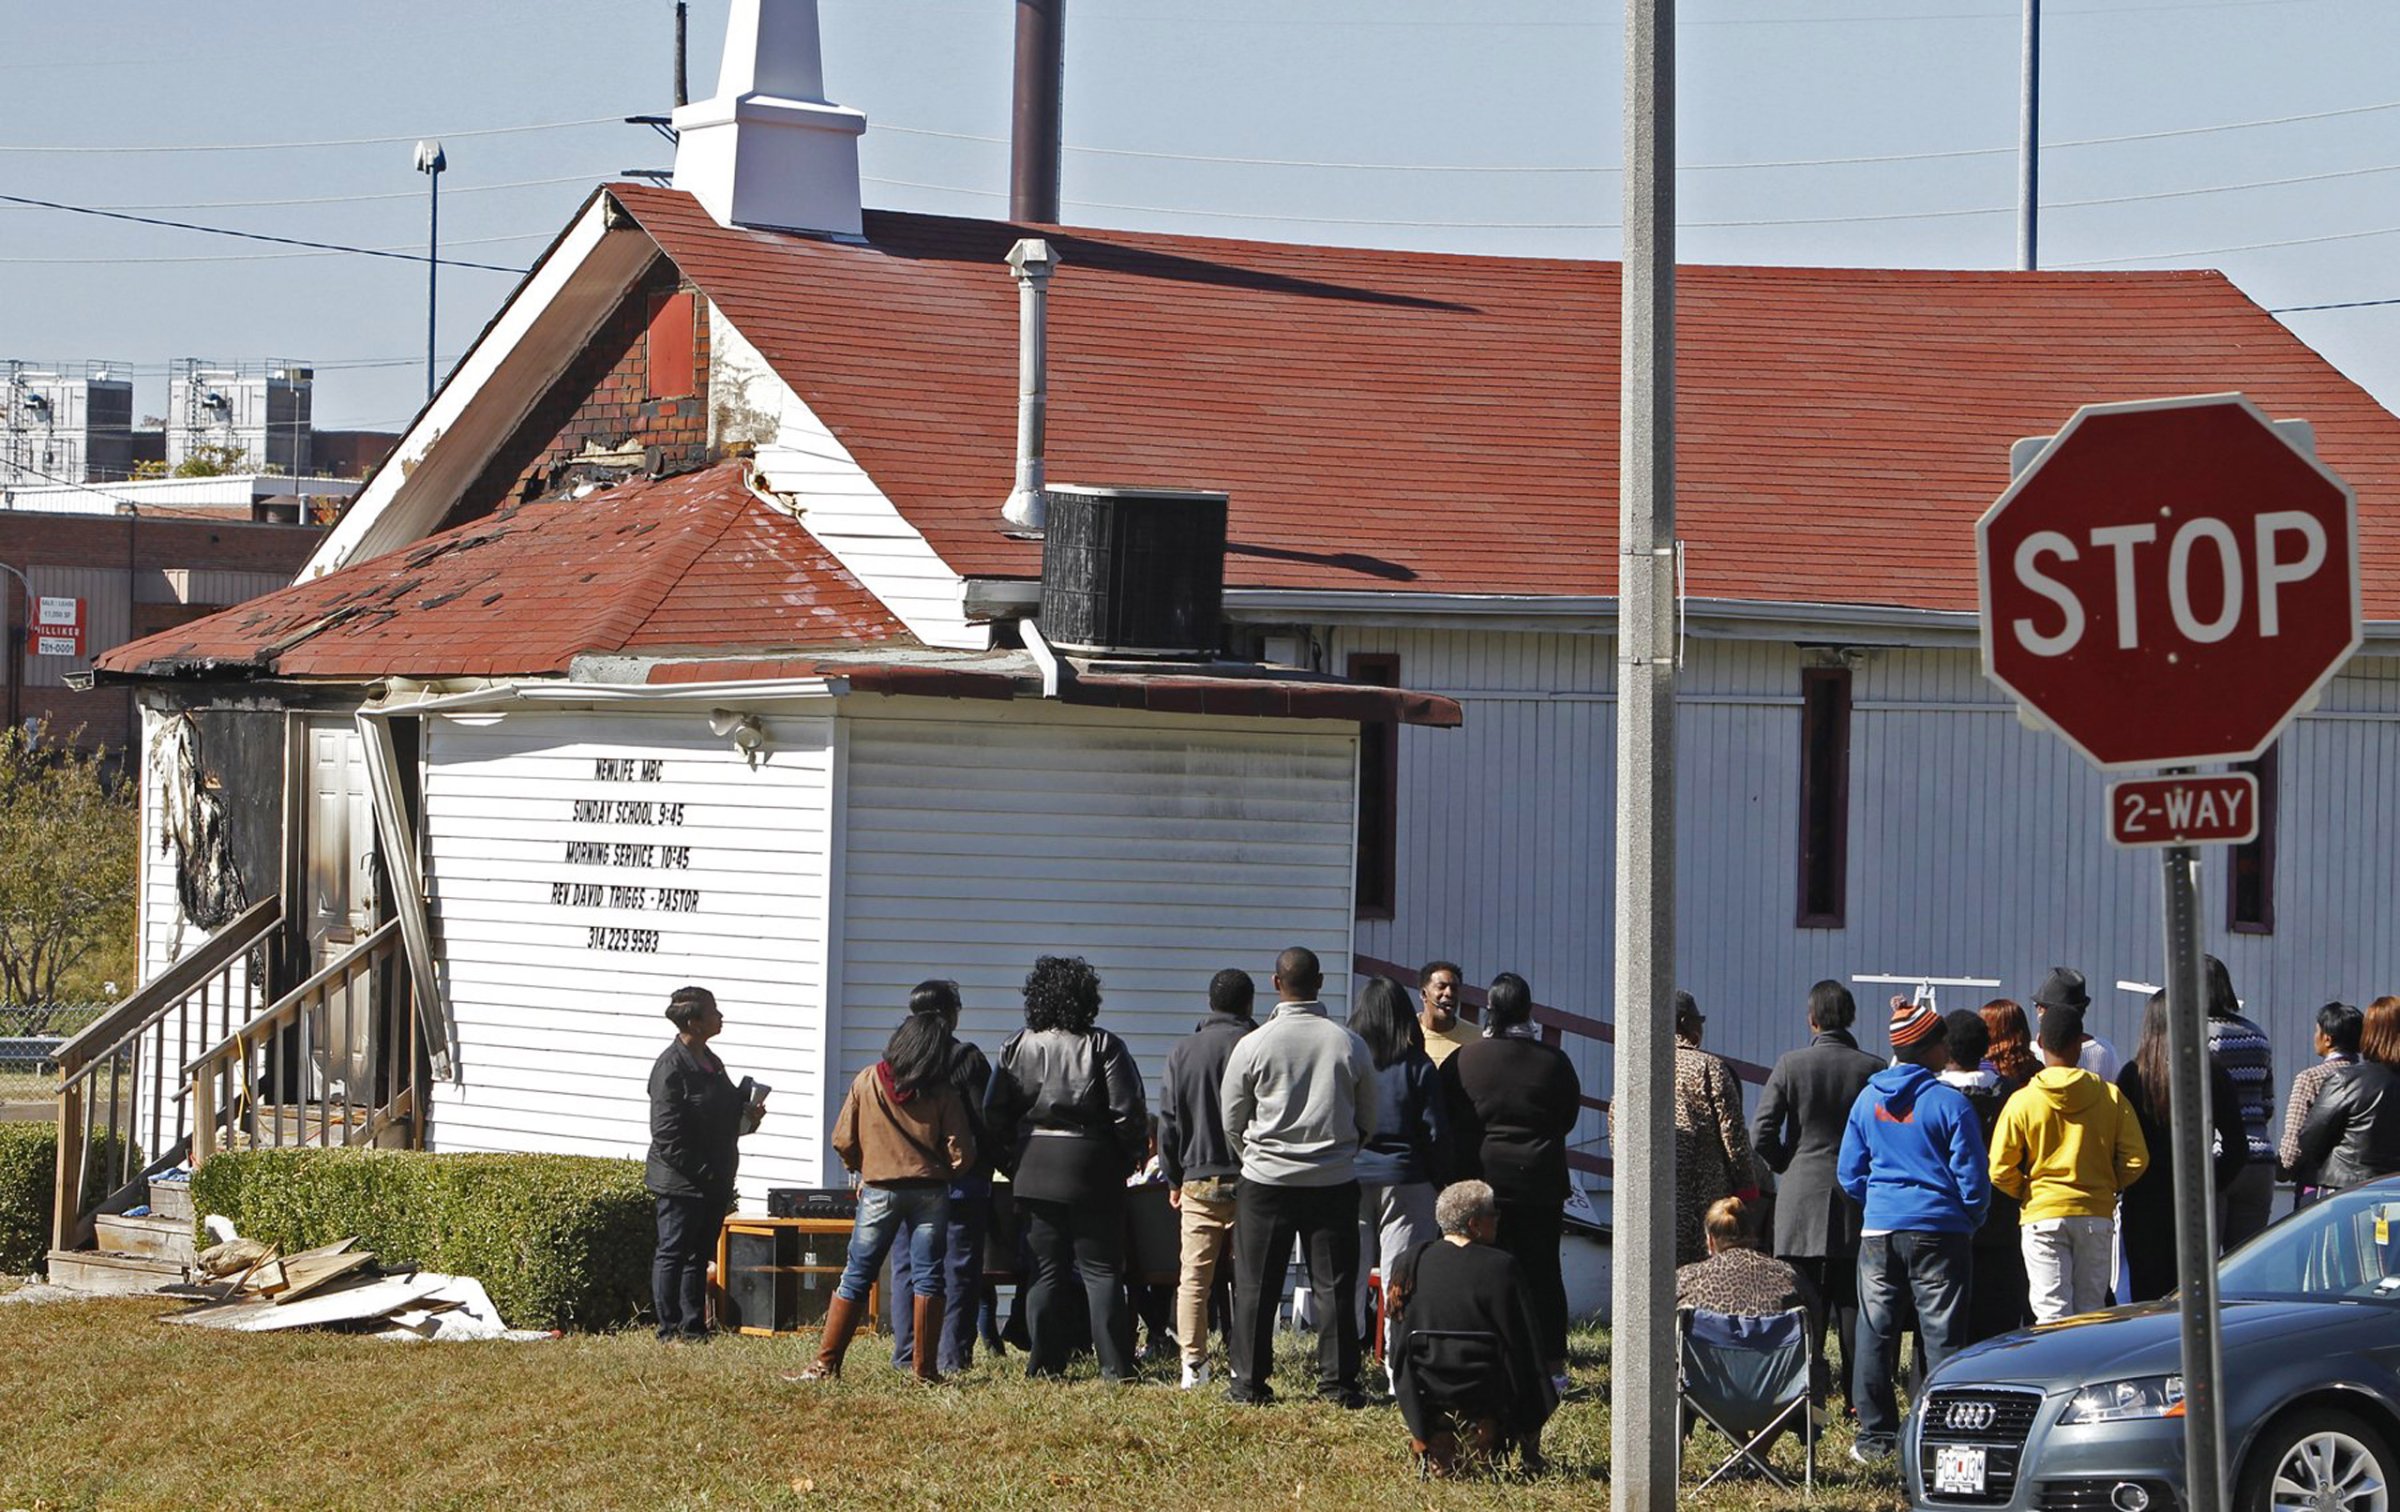 In this Sunday, Oct. 18, 2015 photo, an outdoor service is held following a fire at the New Life Missionary Baptist Church in St. Louis. Someone has been setting fire to predominantly black churches in the St. Louis area, and investigators are trying to determine if the arsonist is targeting either religion or race. (J.B. Forbes/St. Louis Post-Dispatch via AP) EDWARDSVILLE INTELLIGENCER OUT; THE ALTON TELEGRAPH OUT; MANDATORY CREDIT